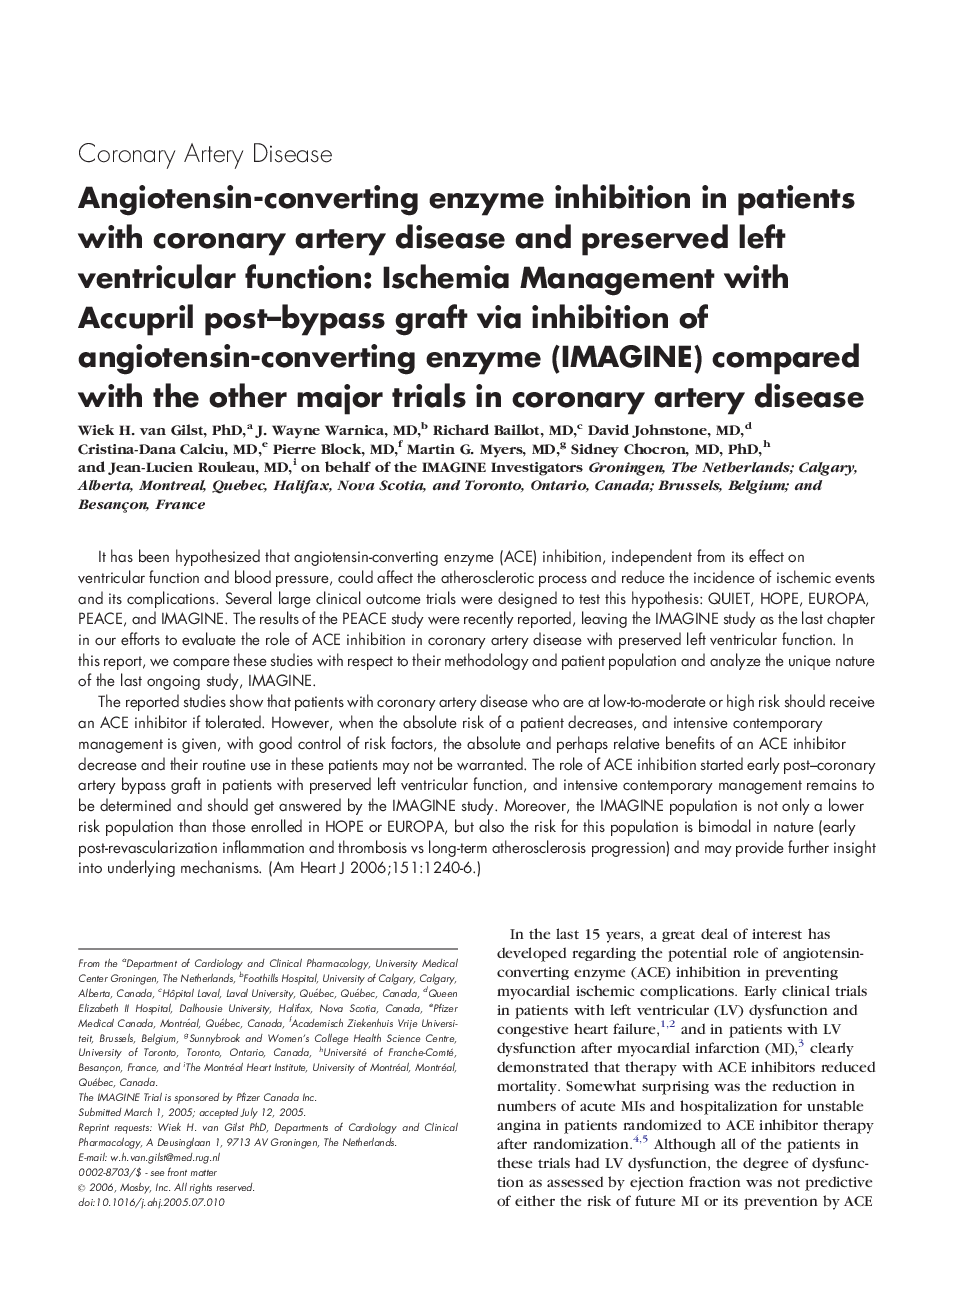 Angiotensin-converting enzyme inhibition in patients with coronary artery disease and preserved left ventricular function : Ischemia Management with Accupril post–bypass graft via inhibition of angiotensin-converting enzyme (IMAGINE) compared with the oth